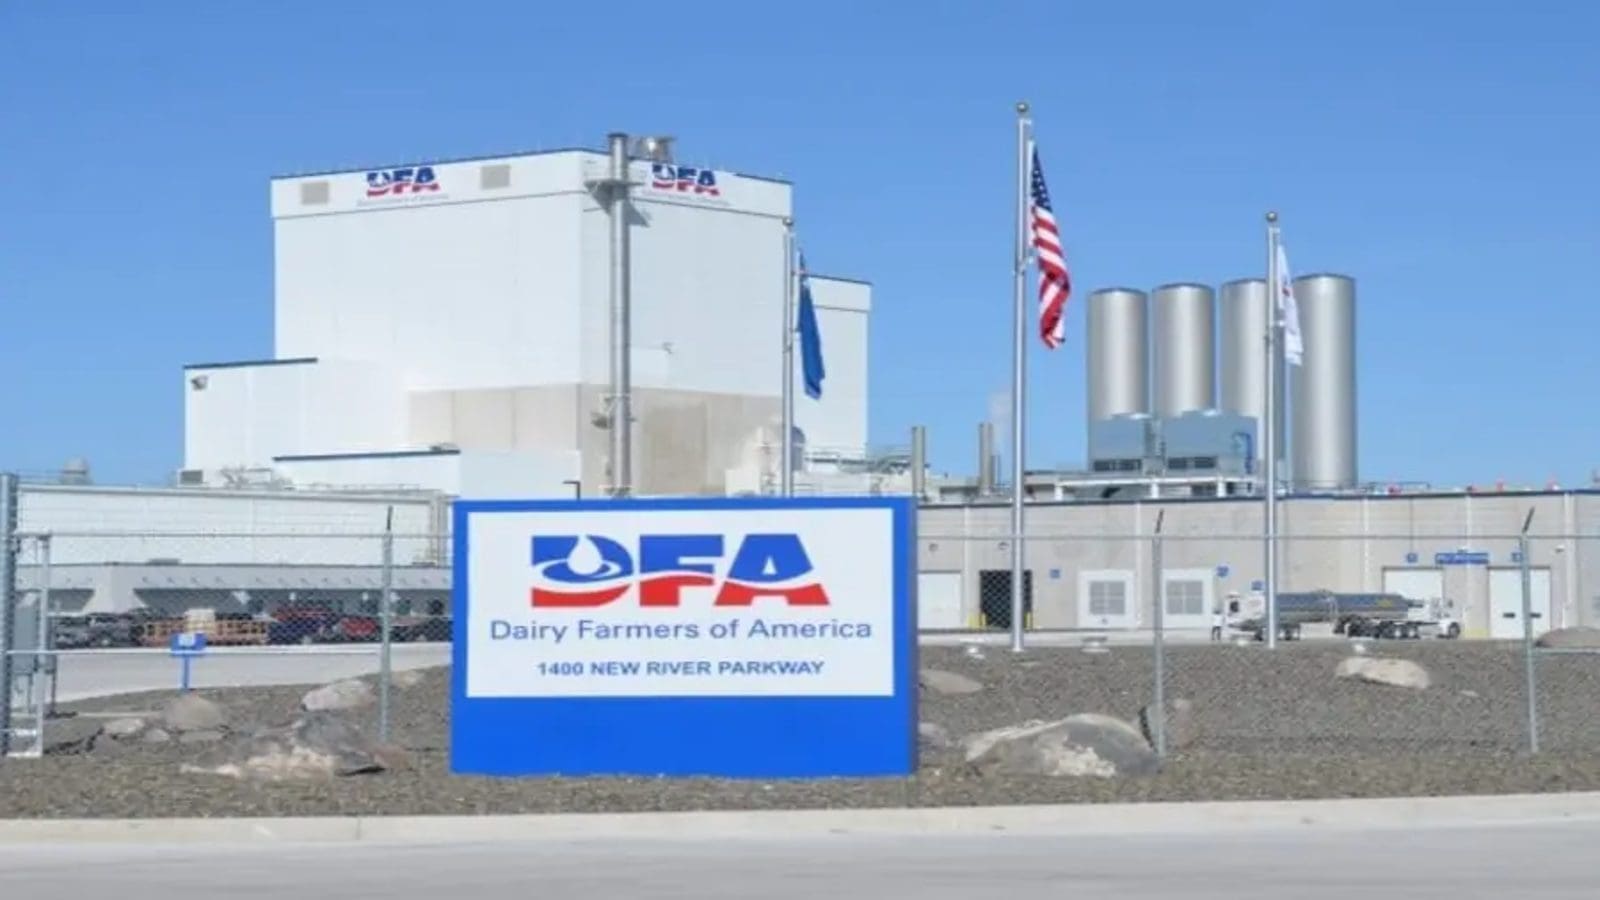 Dairy Farmers of America to receive US$45m from USDA to scale methane emissions reductions